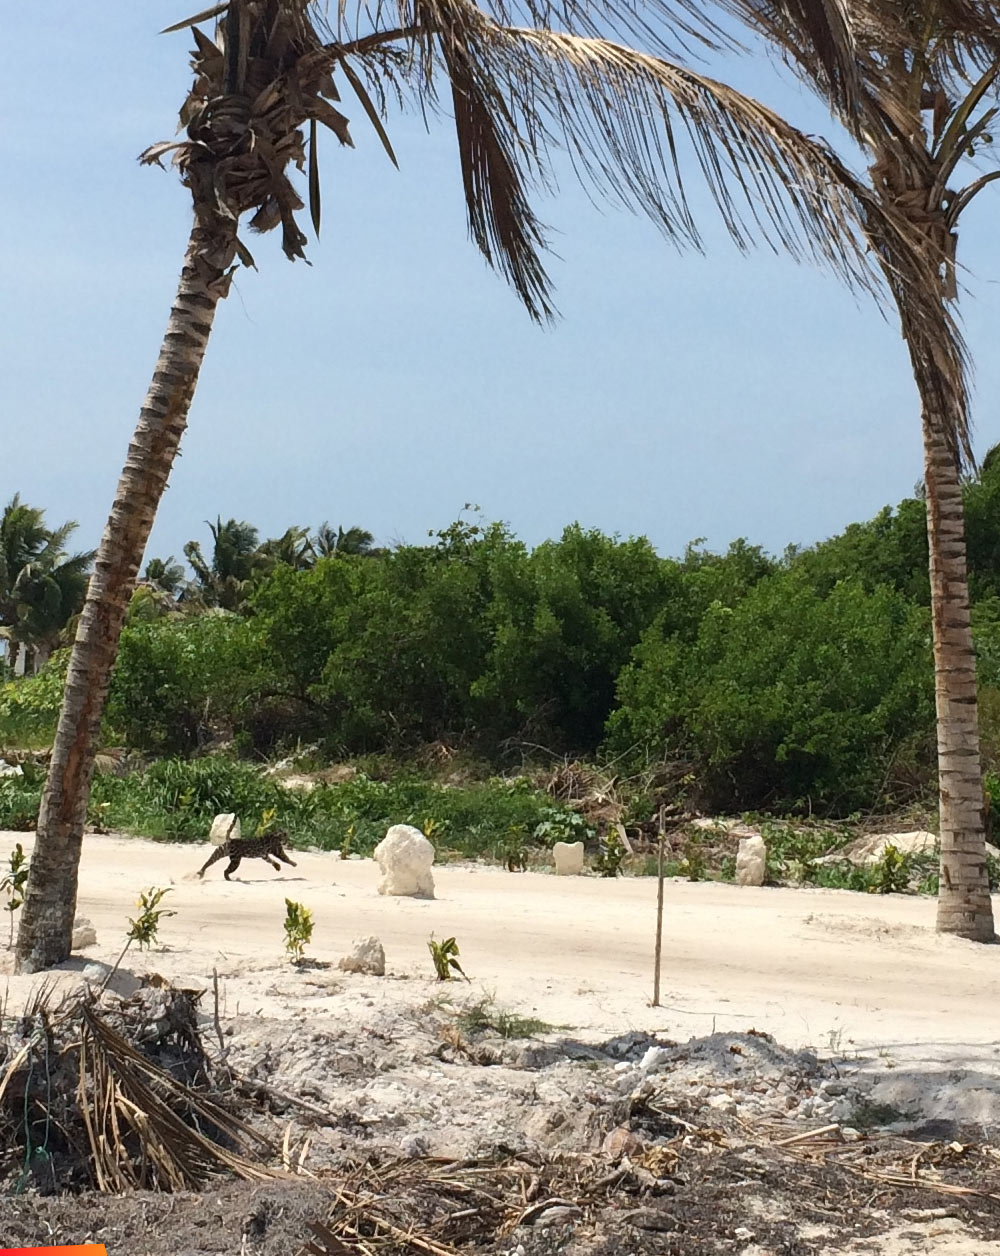 Ocelot running right behind Costa Blu Dive and Beach Resort on Ambergris Caye